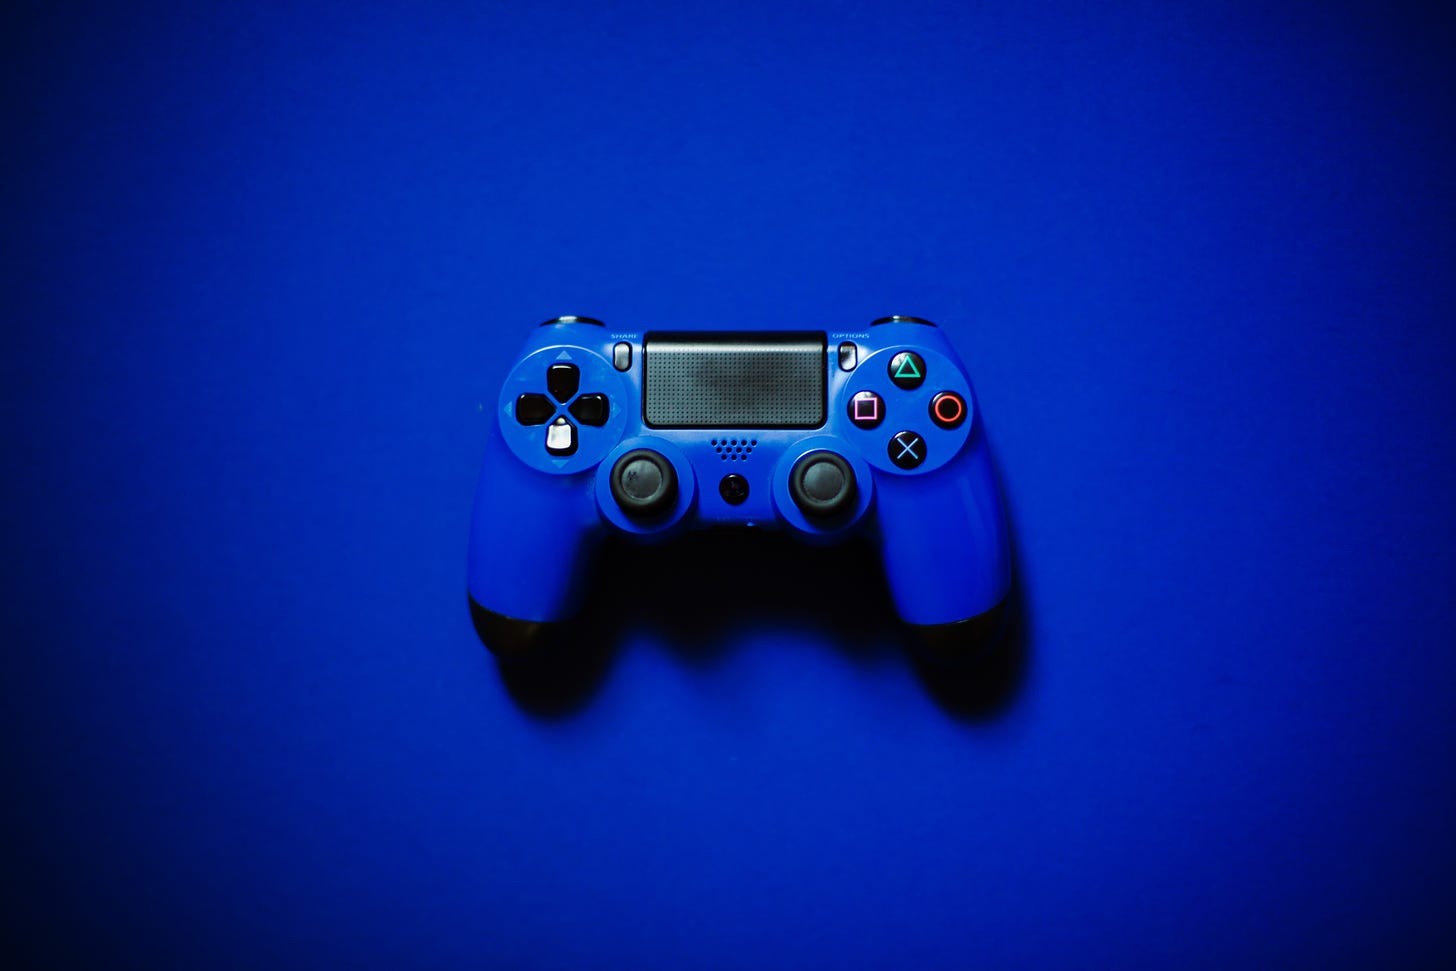 a blue playstation 4 controller against a darker blue background